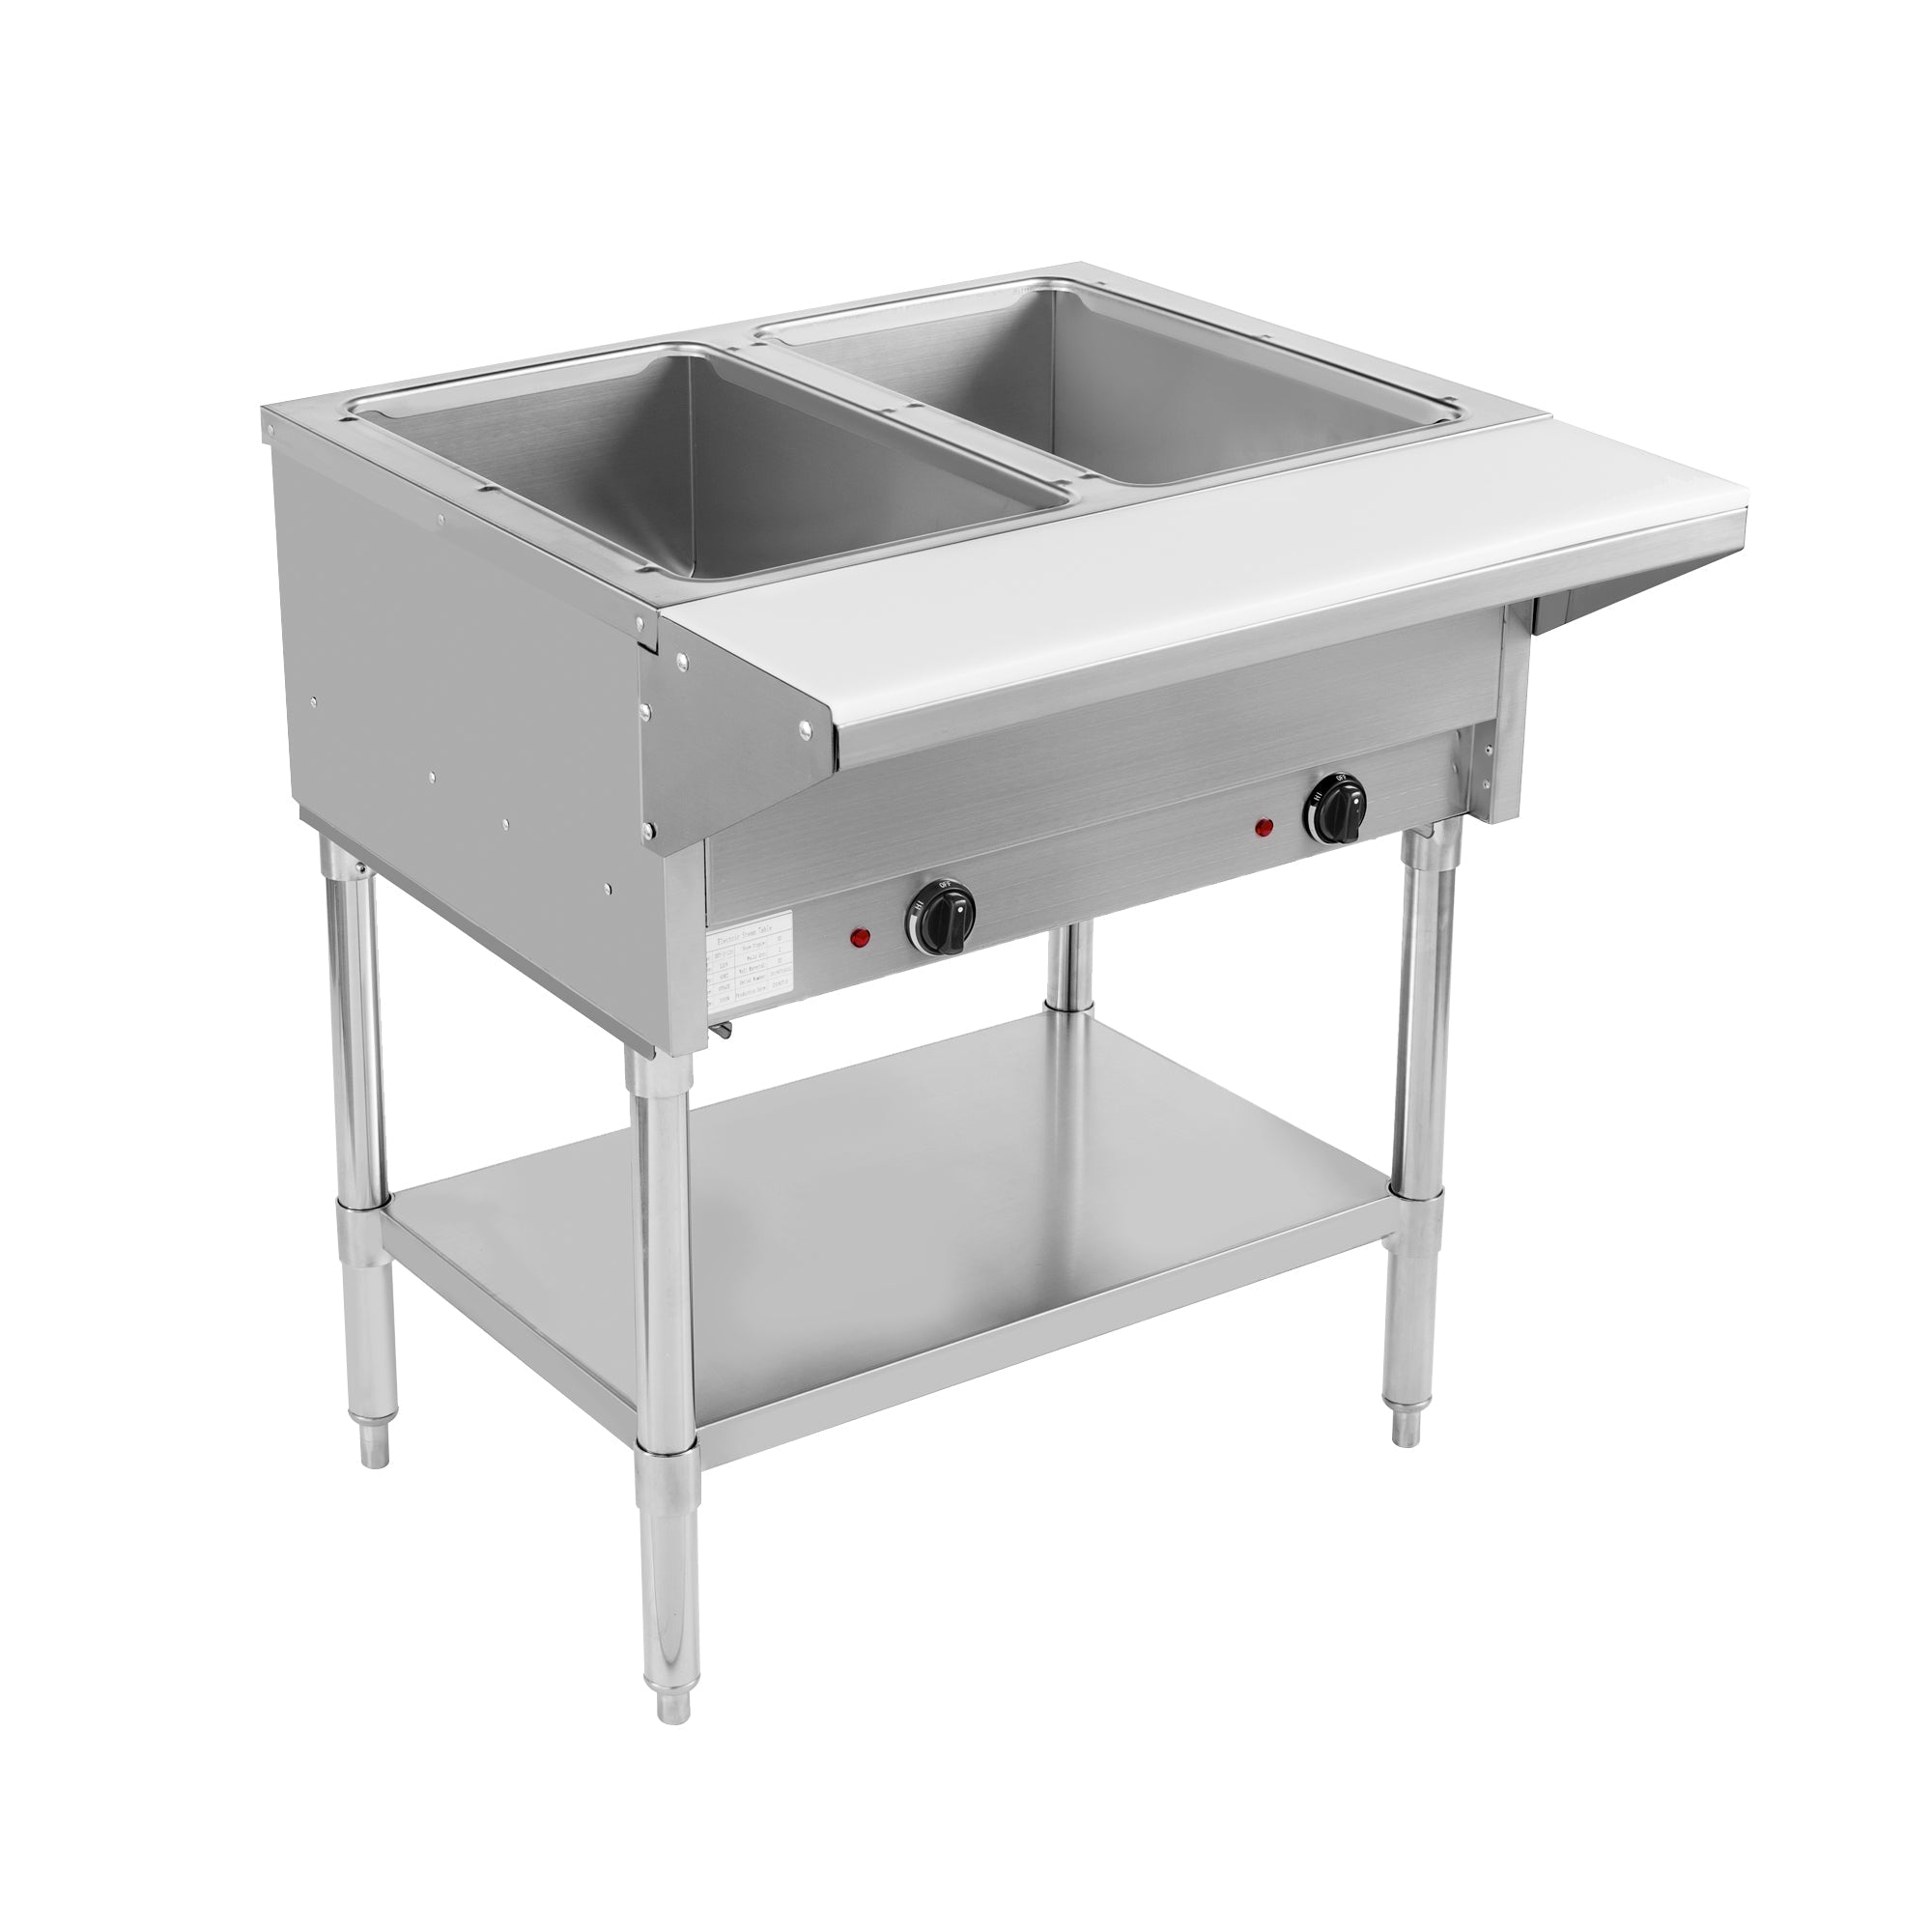 BevLes - BVST-2-240, BevLes 2 Well Electric Steam Table, 230V, in Silver